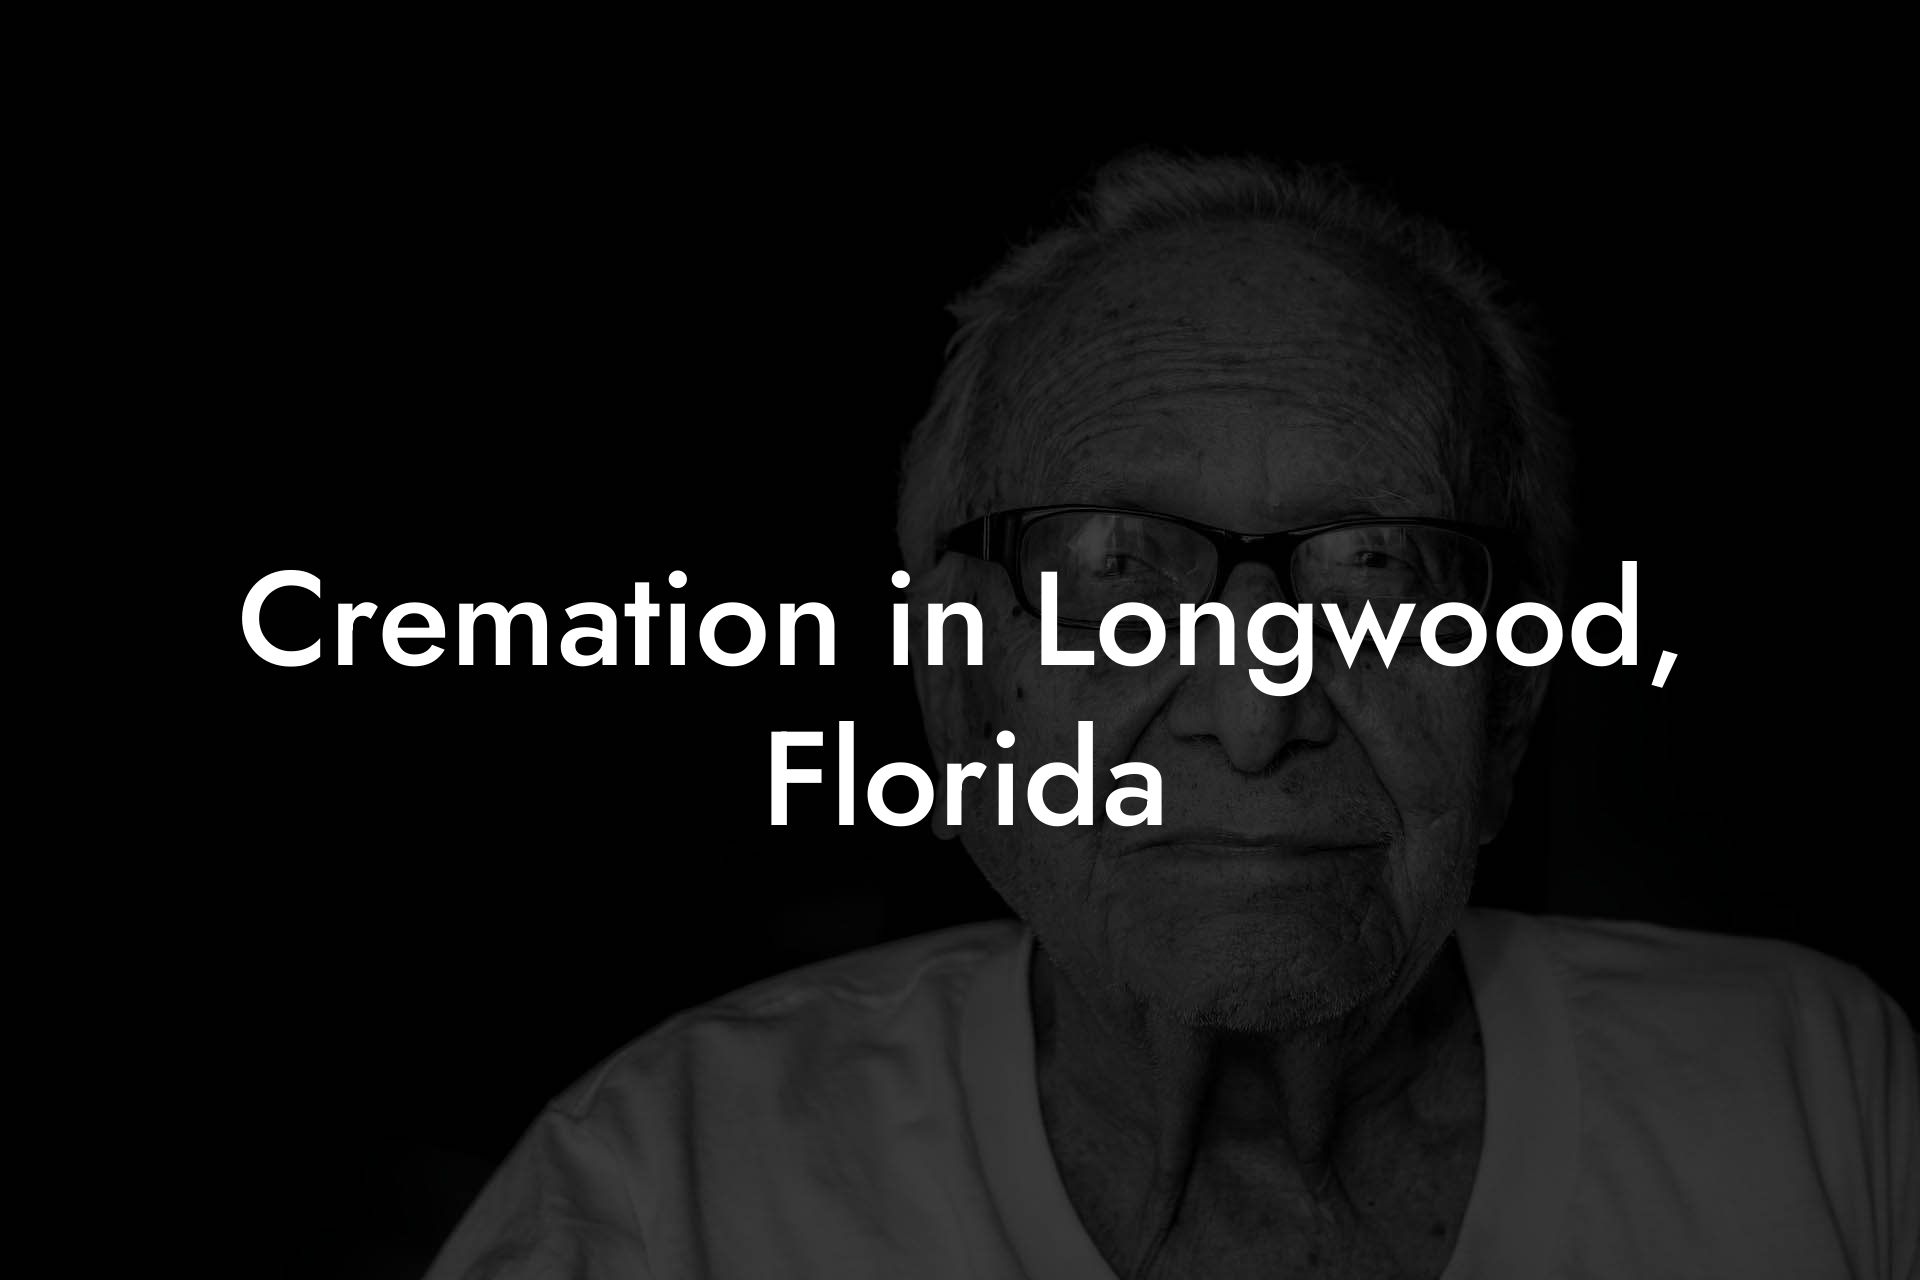 Cremation in Longwood, Florida